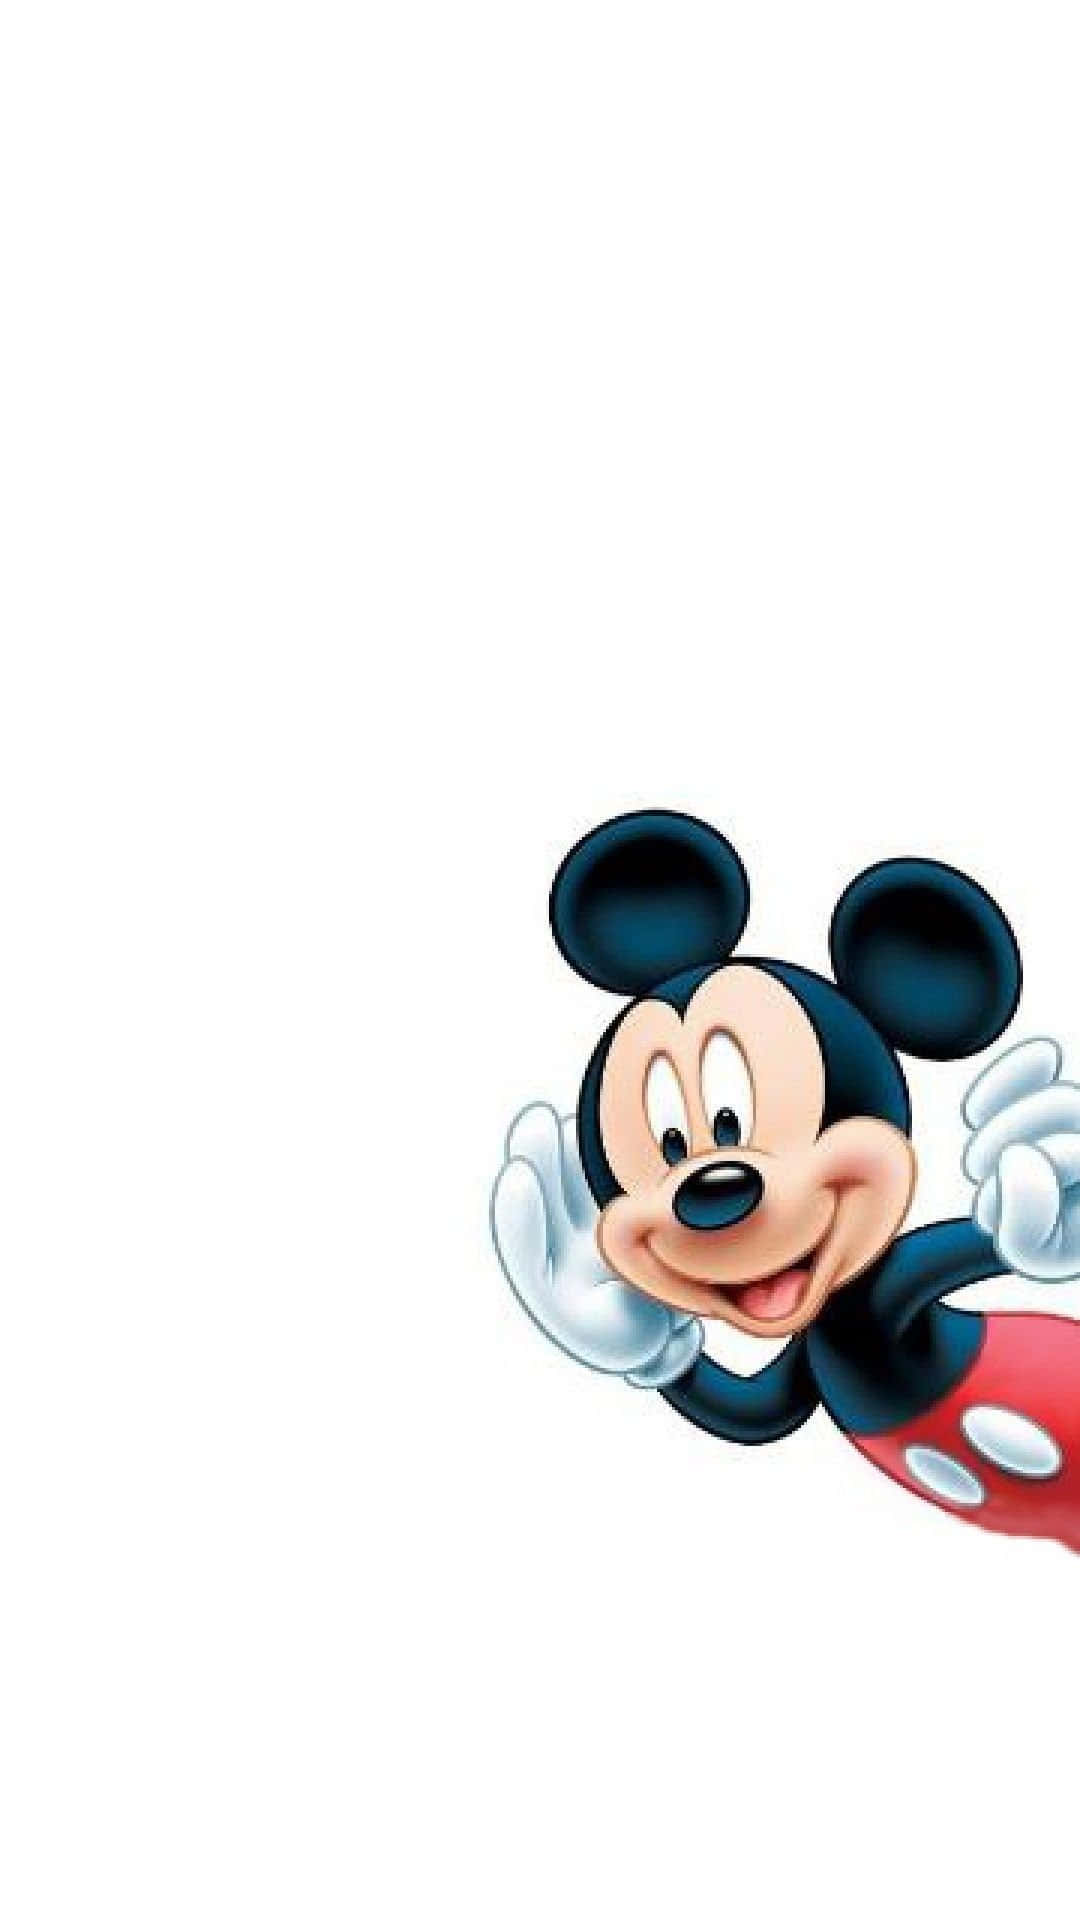 Look how cute Mickey Mouse is! Wallpaper